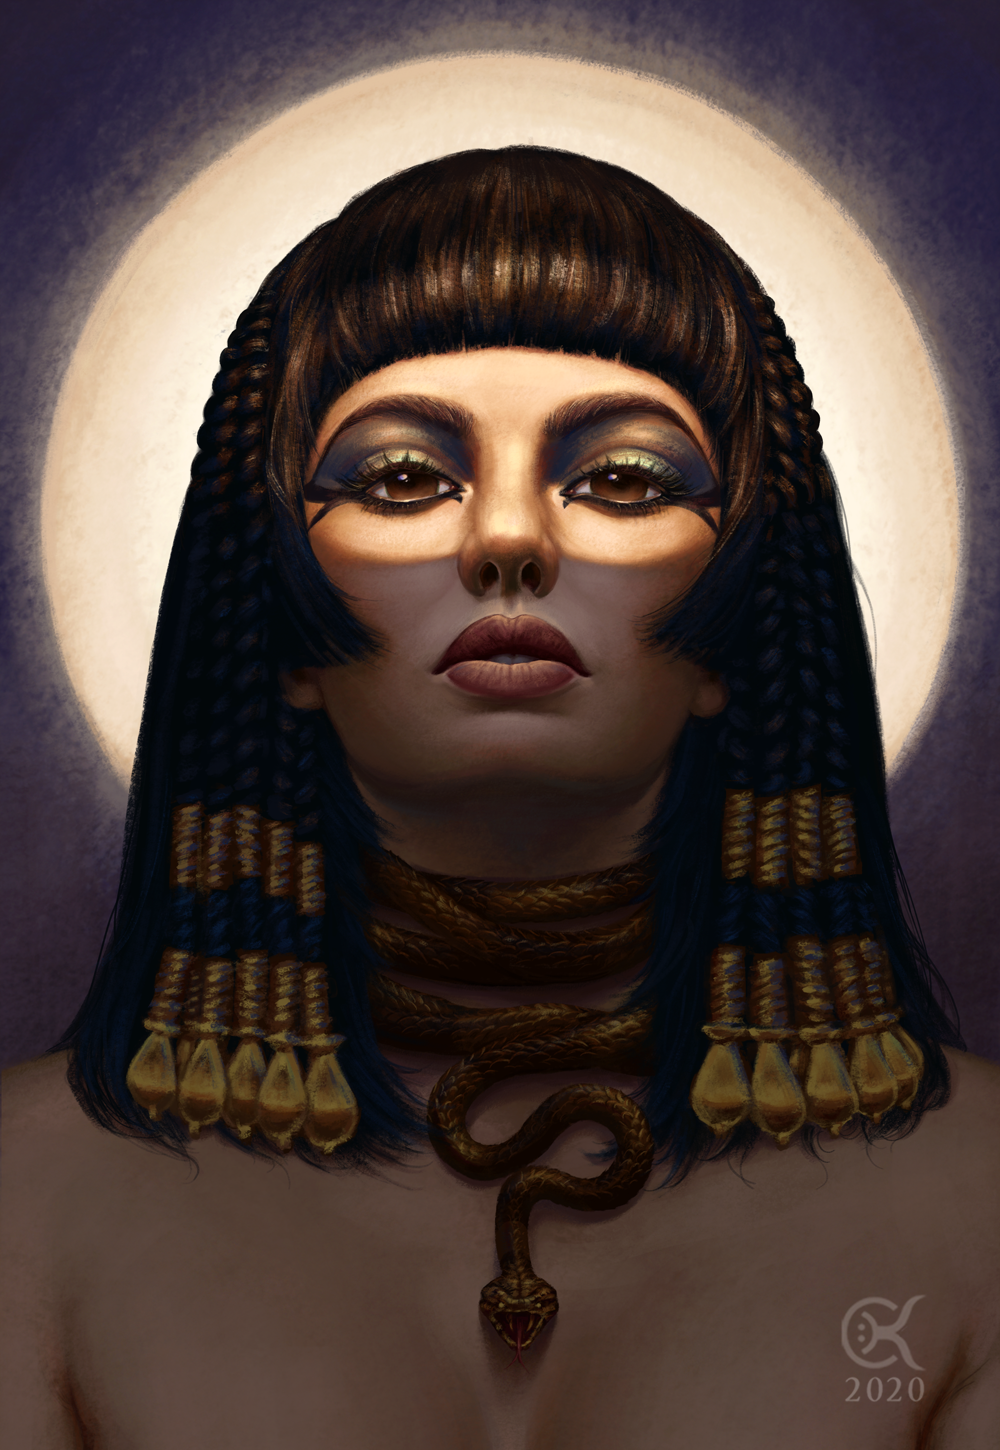 Cleopatra - Drawing, Cleopatra, Queen, Egypt, Chalky Nan, Art